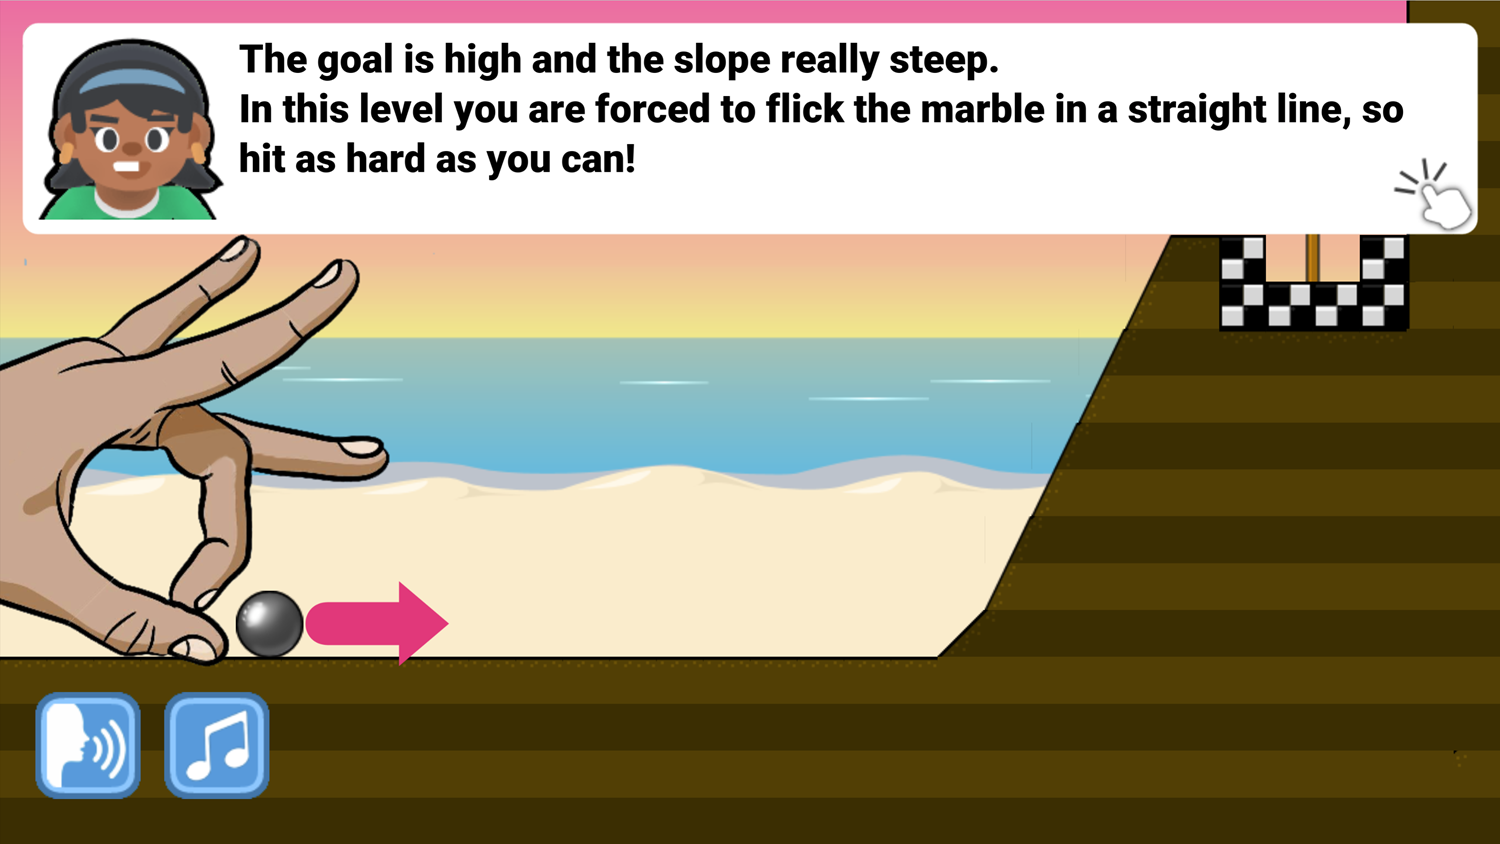 Marbles And Forces Steep Slope Screenshot.